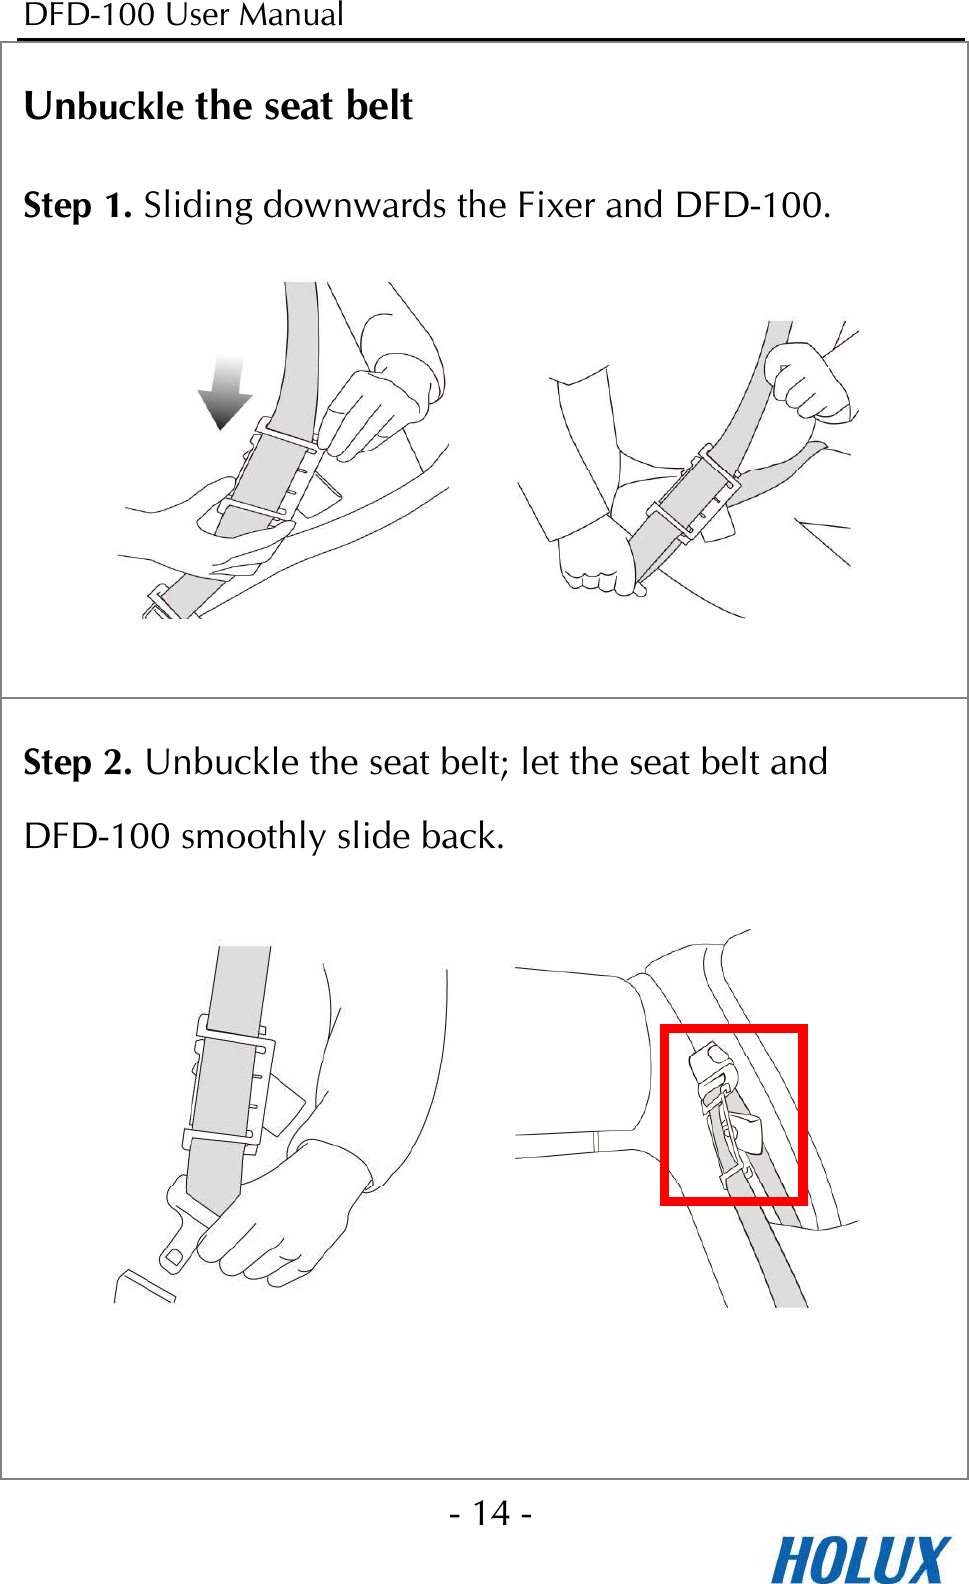 DFD-100 User Manual - 14 -  Unbuckle the seat belt Step 1. Sliding downwards the Fixer and DFD-100.        Step 2. Unbuckle the seat belt; let the seat belt and DFD-100 smoothly slide back.      